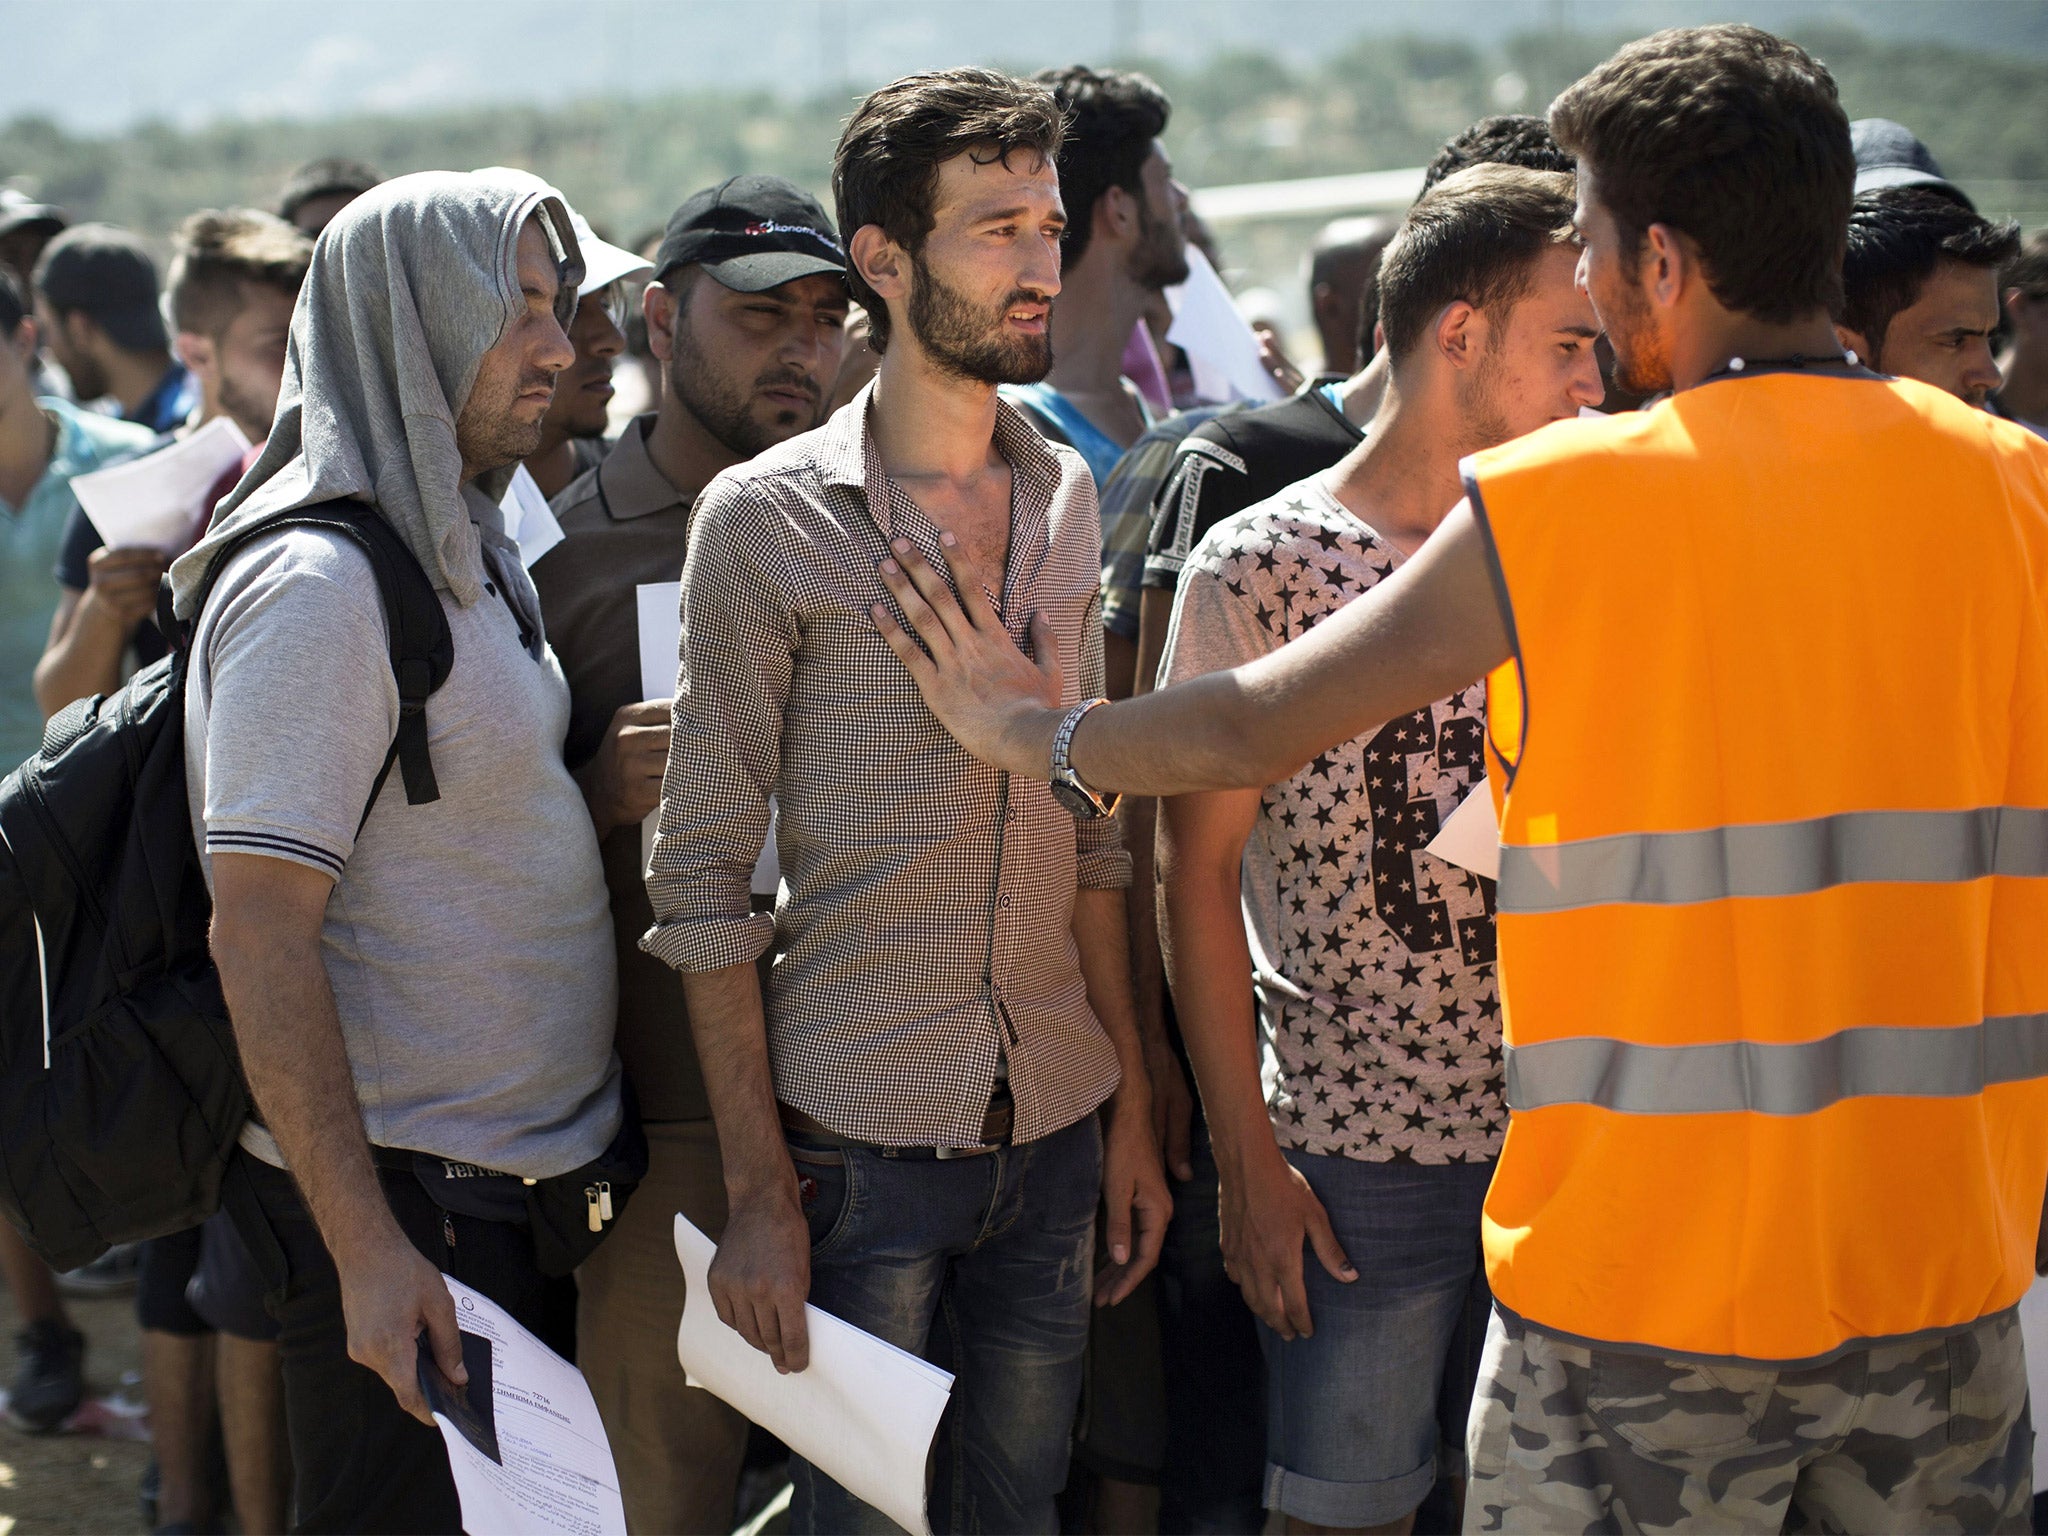 Refugees, mainly from Syria, wait at a registration center held at a stadium on the Greek island of Lesbos